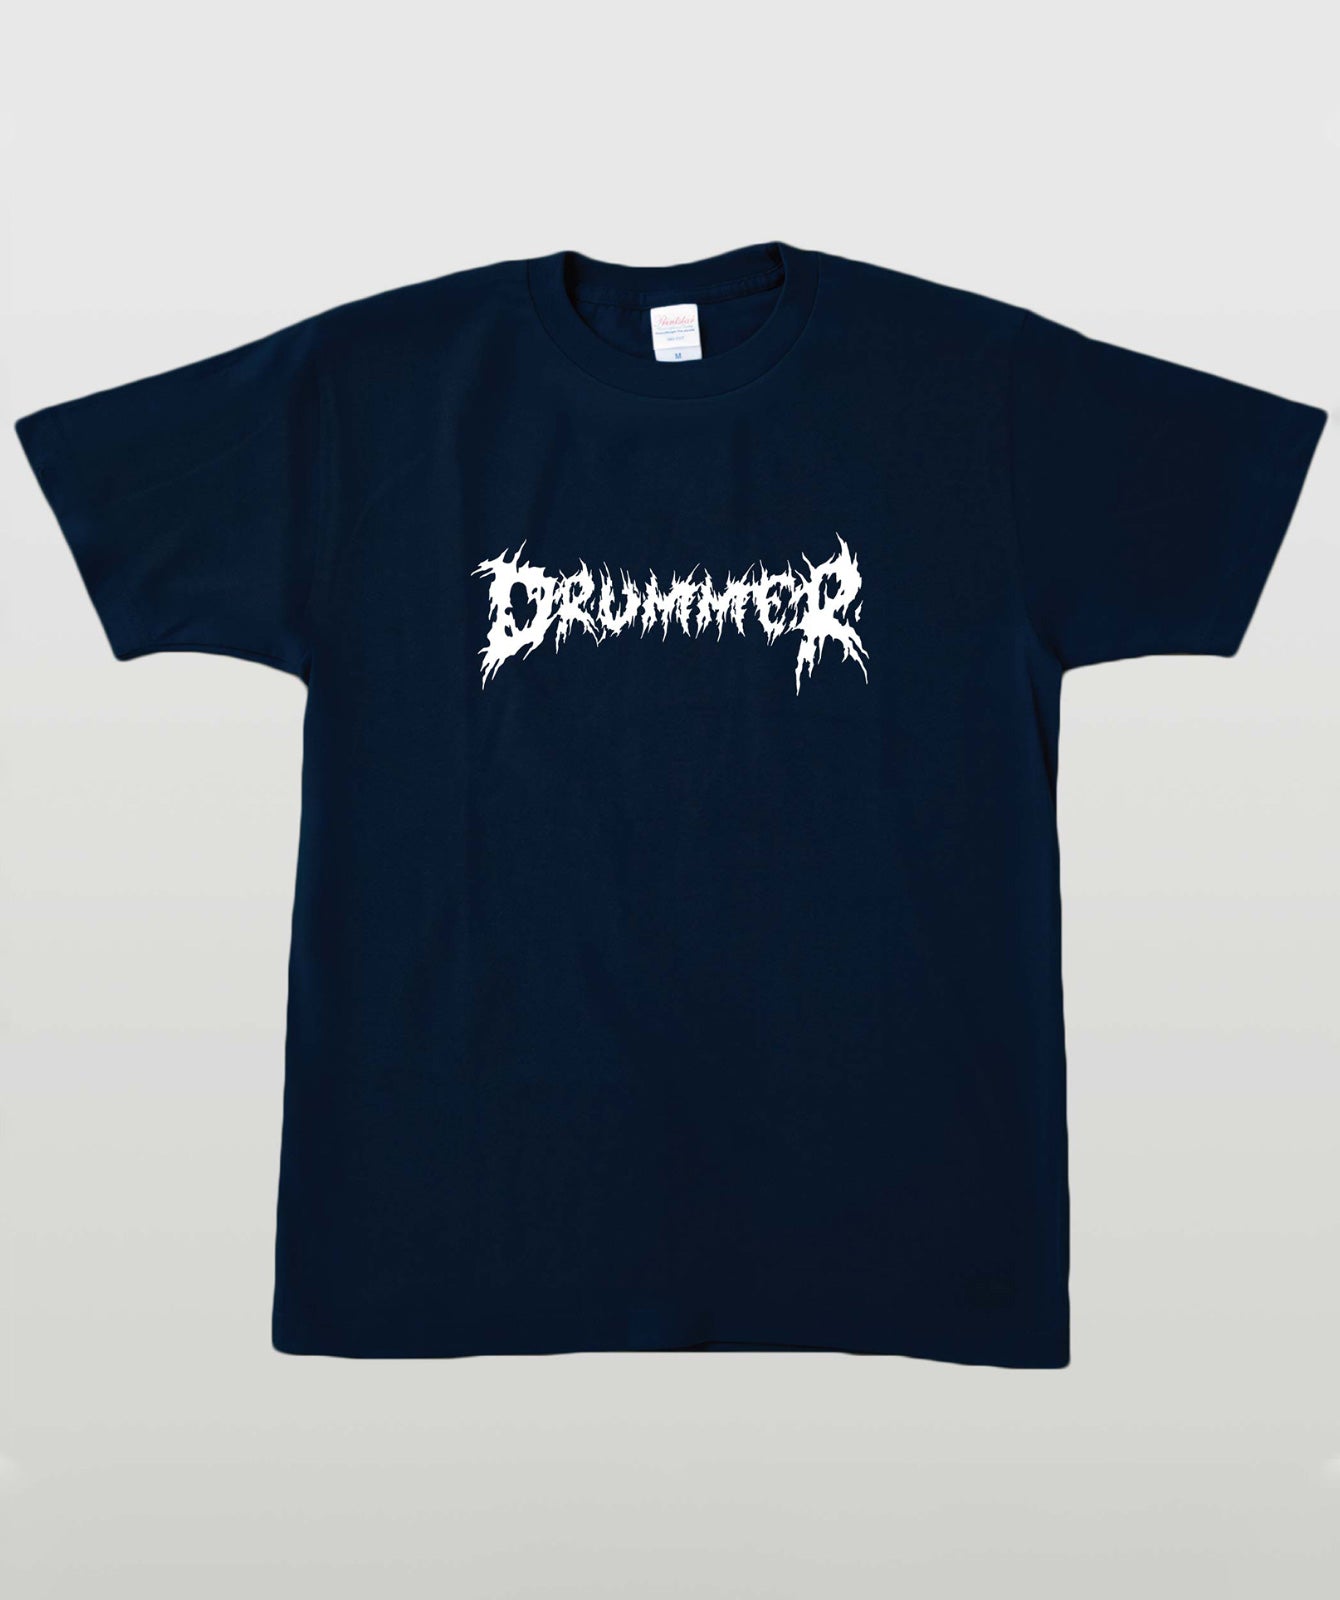 MS PLAYER SERIES ～DRUMMER Type H～